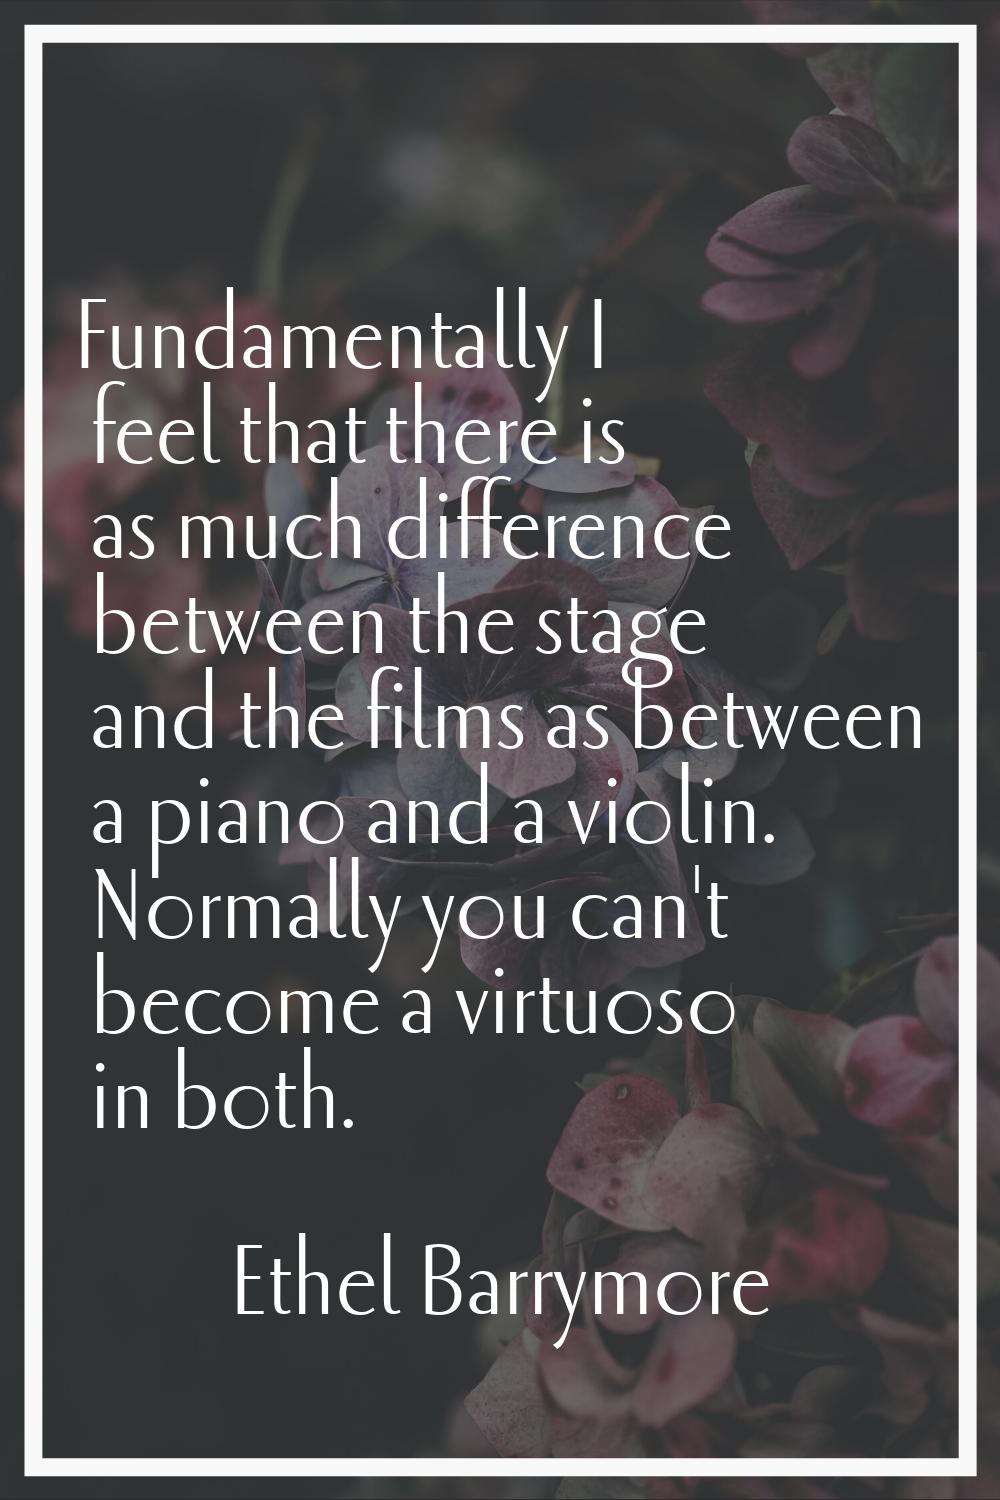 Fundamentally I feel that there is as much difference between the stage and the films as between a 